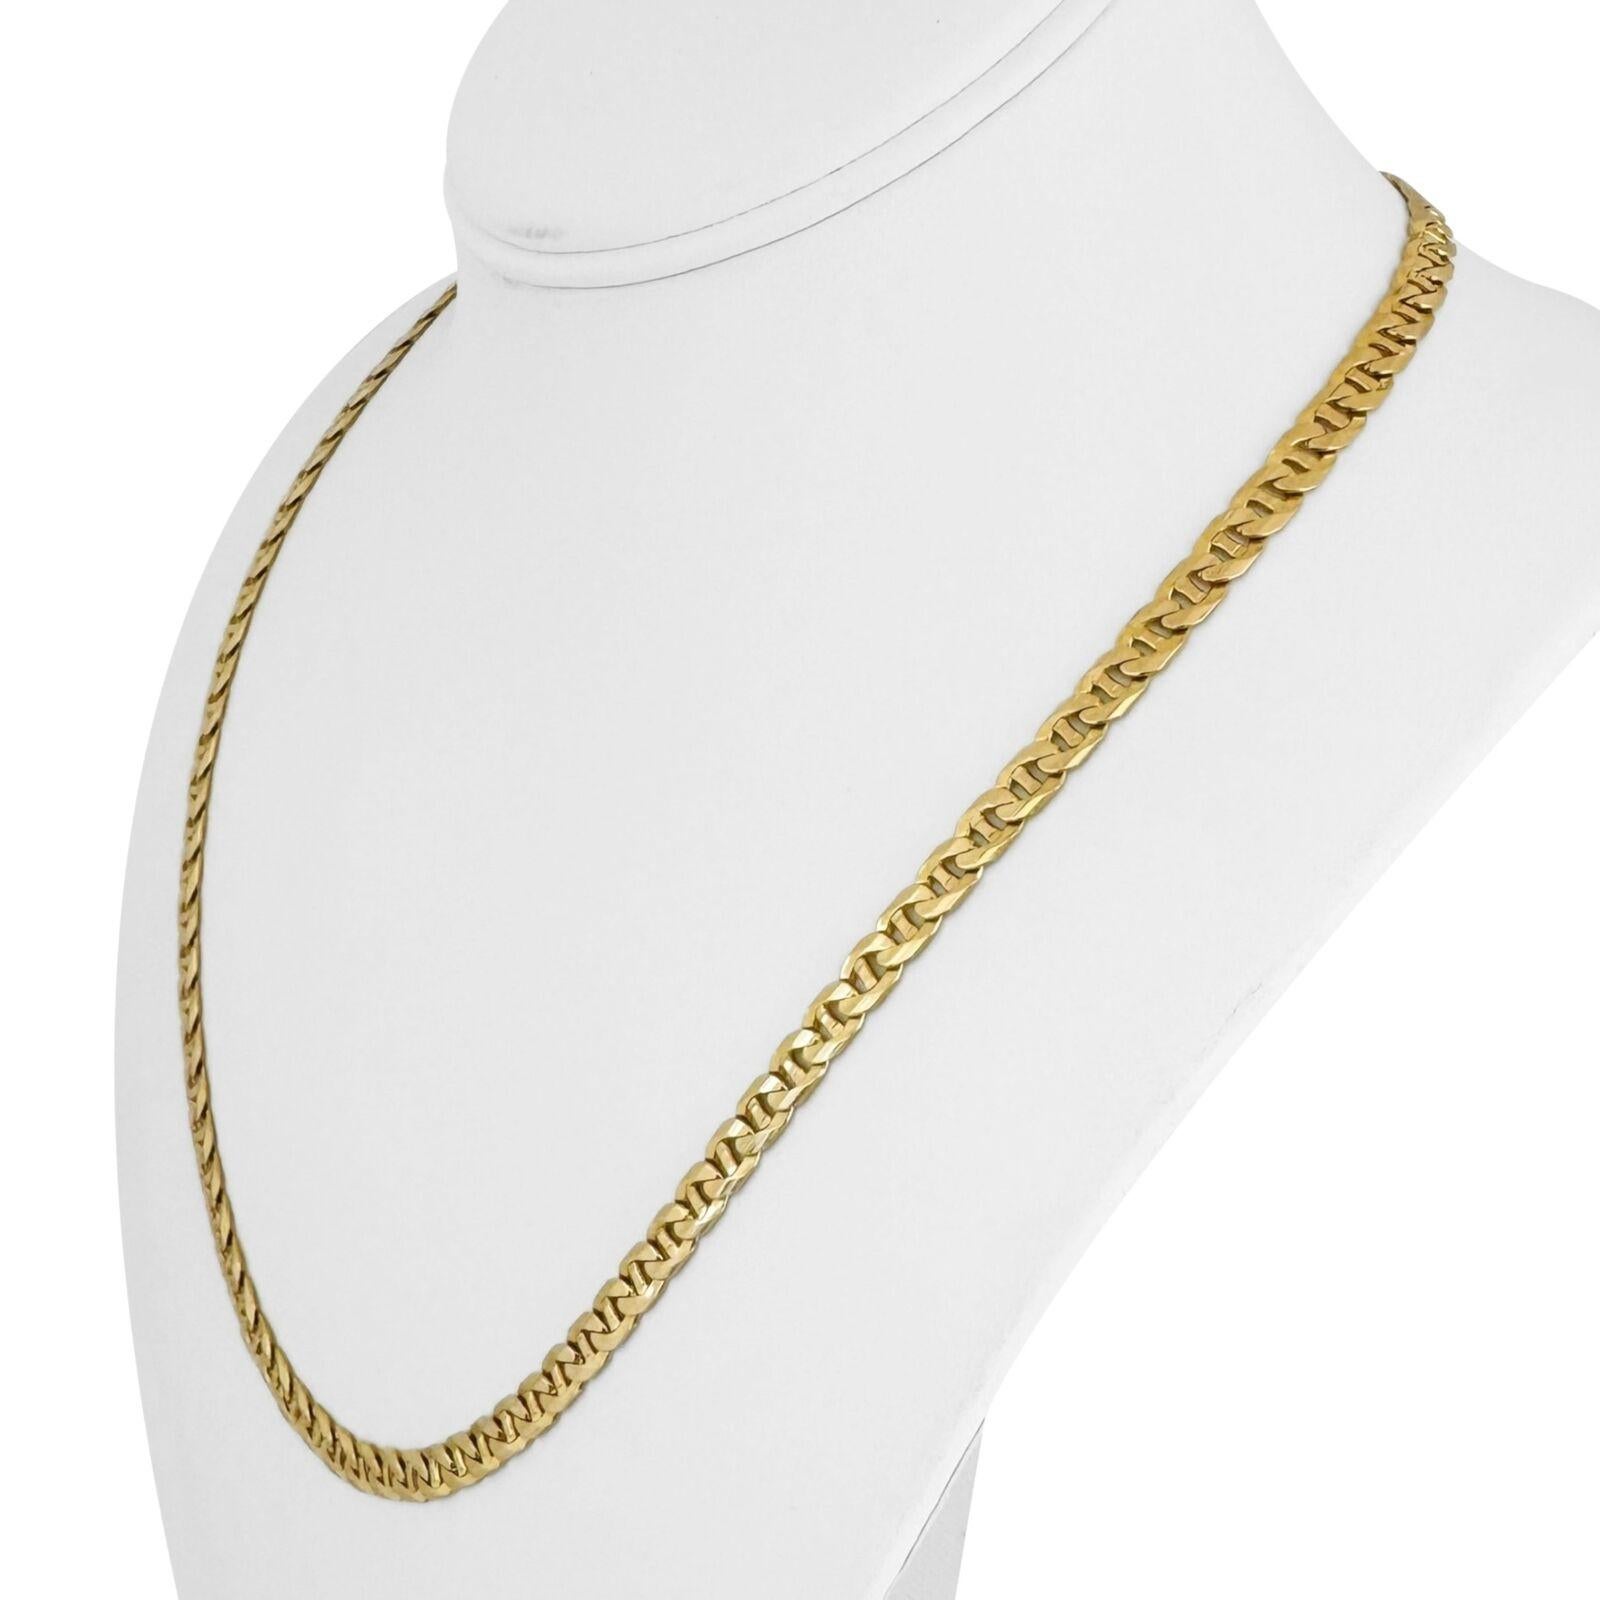 14k Yellow Gold 23.5g Solid 5mm Mariner Gucci Link Chain Necklace Italy 21